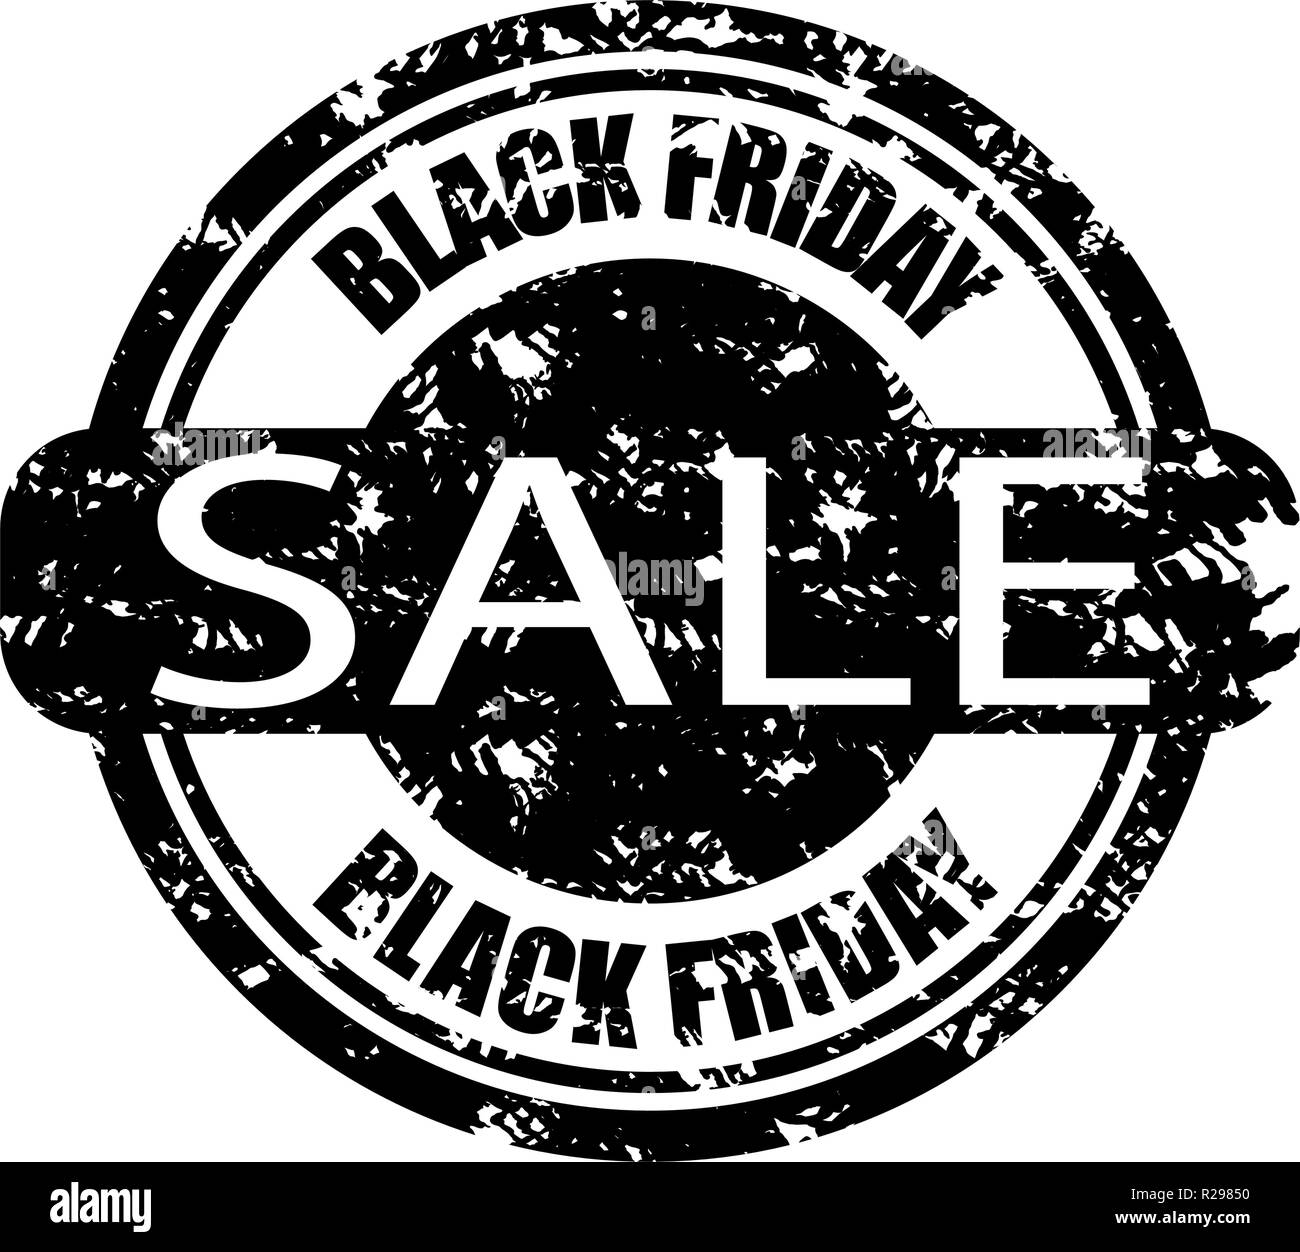 Sale print black friday isolate on white. Vector sale texture imprint, print rubber stamp, shopping price black friday illustration Stock Vector